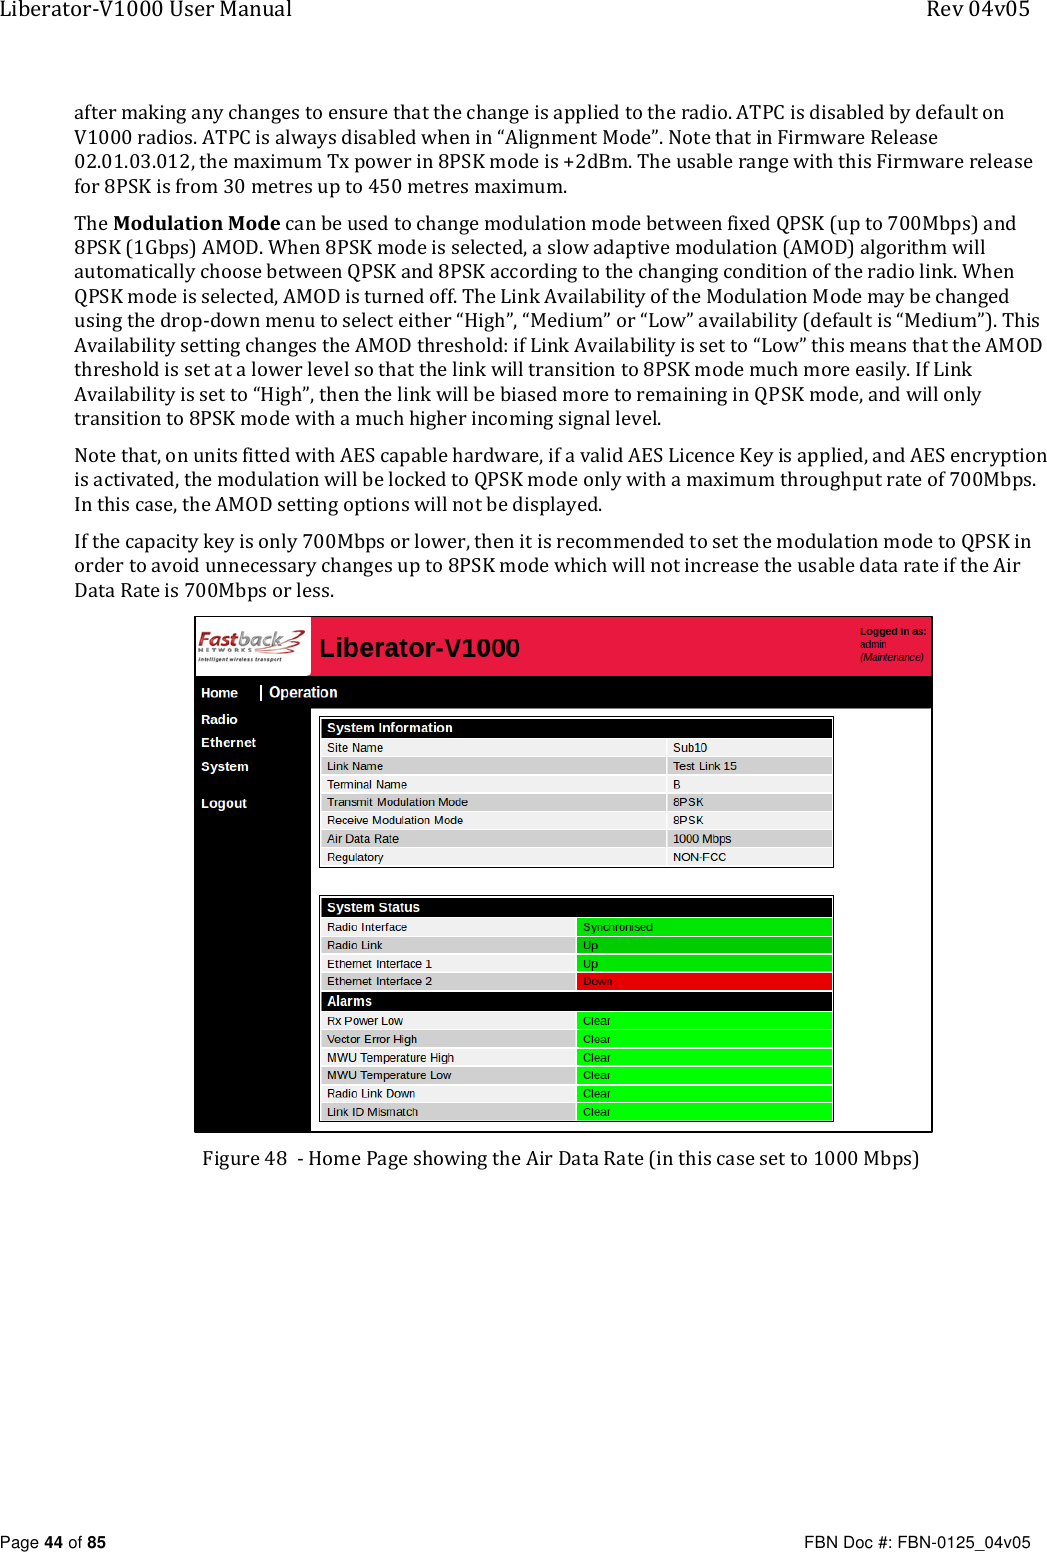 Liberator-V1000 User Manual  Rev 04v05     Page 44 of 85   FBN Doc #: FBN-0125_04v05 after making any changes to ensure that the change is applied to the radio. ATPC is disabled by default on V1000 radios. ATPC is always disabled when in “Alignment Mode”. Note that in Firmware Release 02.01.03.012, the maximum Tx power in 8PSK mode is +2dBm. The usable range with this Firmware release for 8PSK is from 30 metres up to 450 metres maximum. The Modulation Mode can be used to change modulation mode between fixed QPSK (up to 700Mbps) and 8PSK (1Gbps) AMOD. When 8PSK mode is selected, a slow adaptive modulation (AMOD) algorithm will automatically choose between QPSK and 8PSK according to the changing condition of the radio link. When QPSK mode is selected, AMOD is turned off. The Link Availability of the Modulation Mode may be changed using the drop-down menu to select either “High”, “Medium” or “Low” availability (default is “Medium”). This Availability setting changes the AMOD threshold: if Link Availability is set to “Low” this means that the AMOD threshold is set at a lower level so that the link will transition to 8PSK mode much more easily. If Link Availability is set to “High”, then the link will be biased more to remaining in QPSK mode, and will only transition to 8PSK mode with a much higher incoming signal level. Note that, on units fitted with AES capable hardware, if a valid AES Licence Key is applied, and AES encryption is activated, the modulation will be locked to QPSK mode only with a maximum throughput rate of 700Mbps.  In this case, the AMOD setting options will not be displayed. If the capacity key is only 700Mbps or lower, then it is recommended to set the modulation mode to QPSK in order to avoid unnecessary changes up to 8PSK mode which will not increase the usable data rate if the Air Data Rate is 700Mbps or less.  Figure 48  - Home Page showing the Air Data Rate (in this case set to 1000 Mbps)  